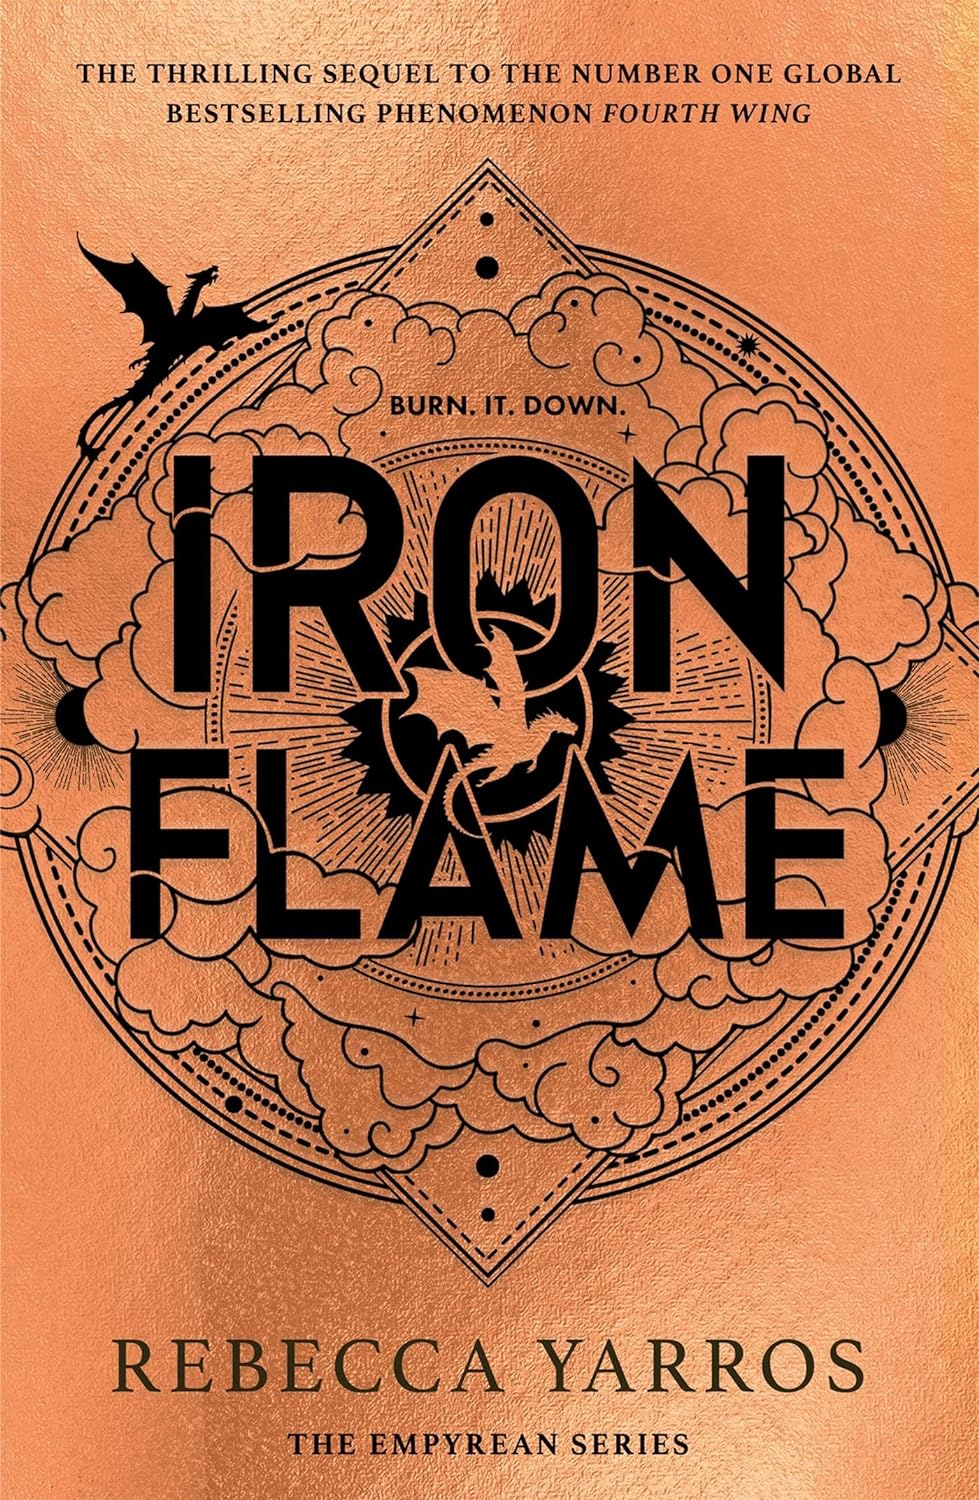 IRON FLAME By REBECCA YARROS